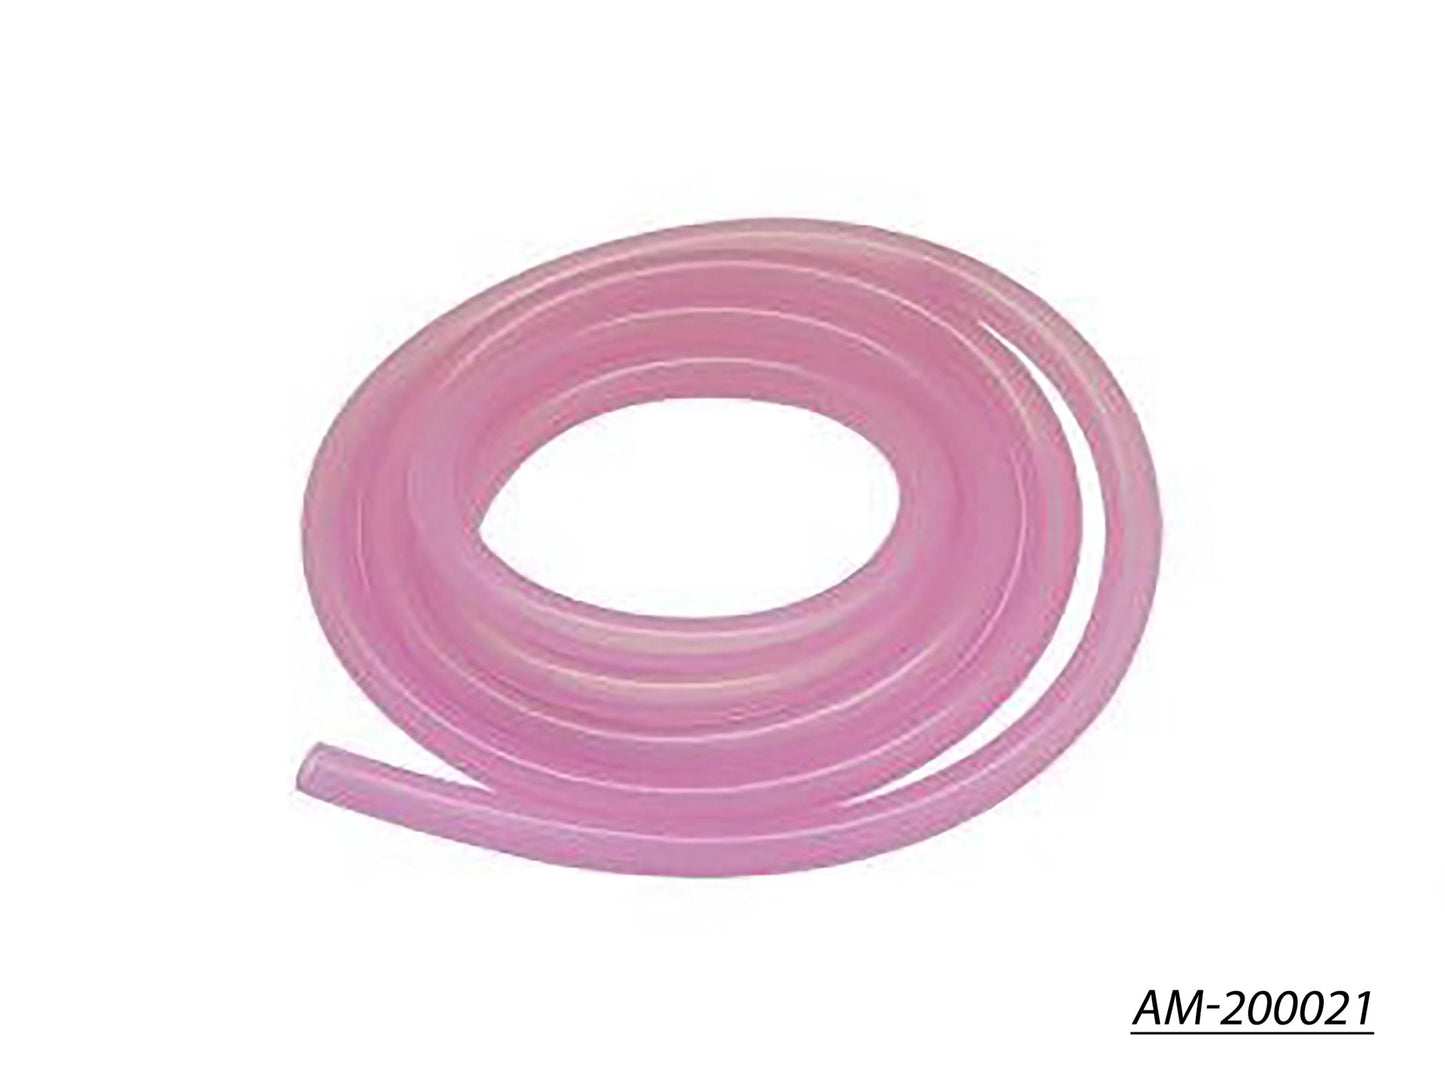 Silicone Tube - Fluorescent Pink (50CM) (AM-200021)